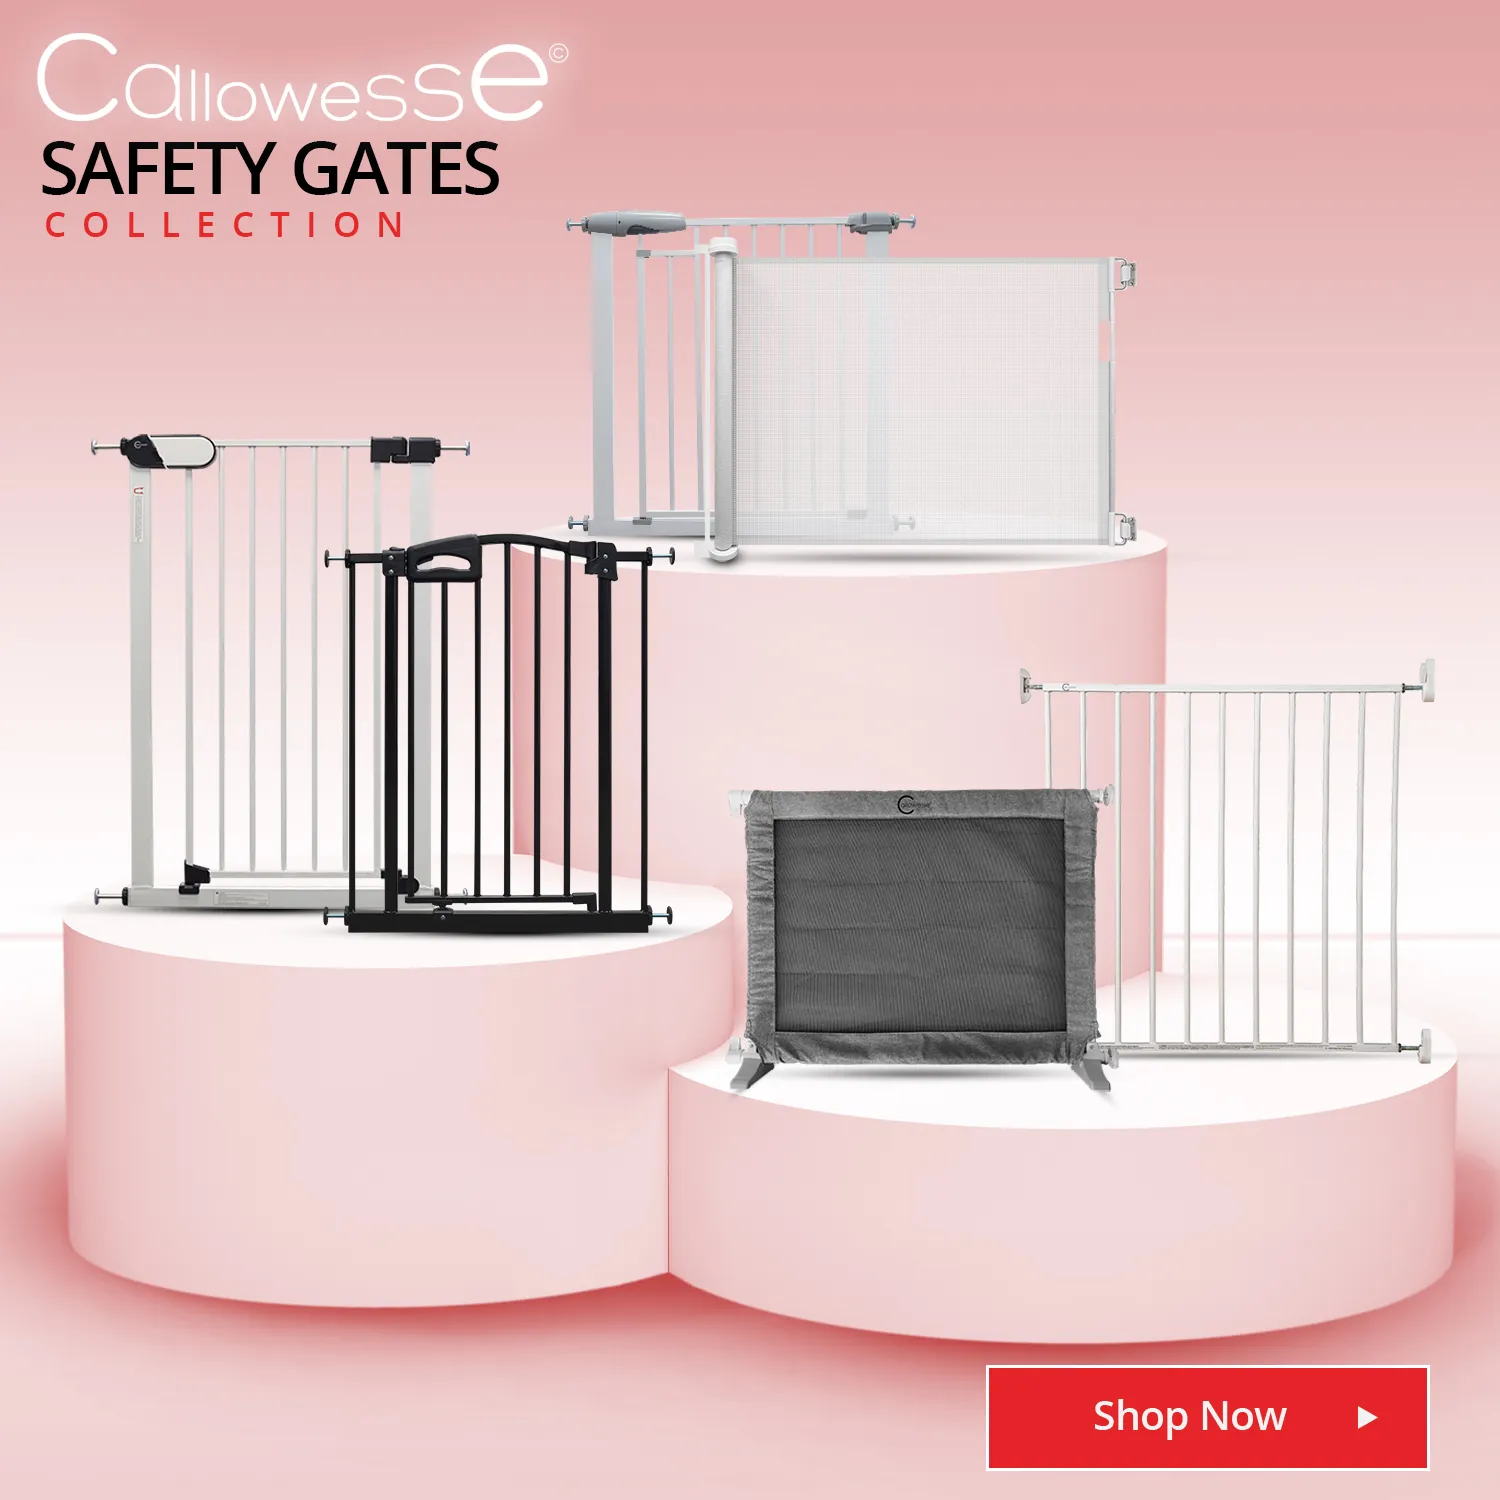 Callowesse Safety-Gate